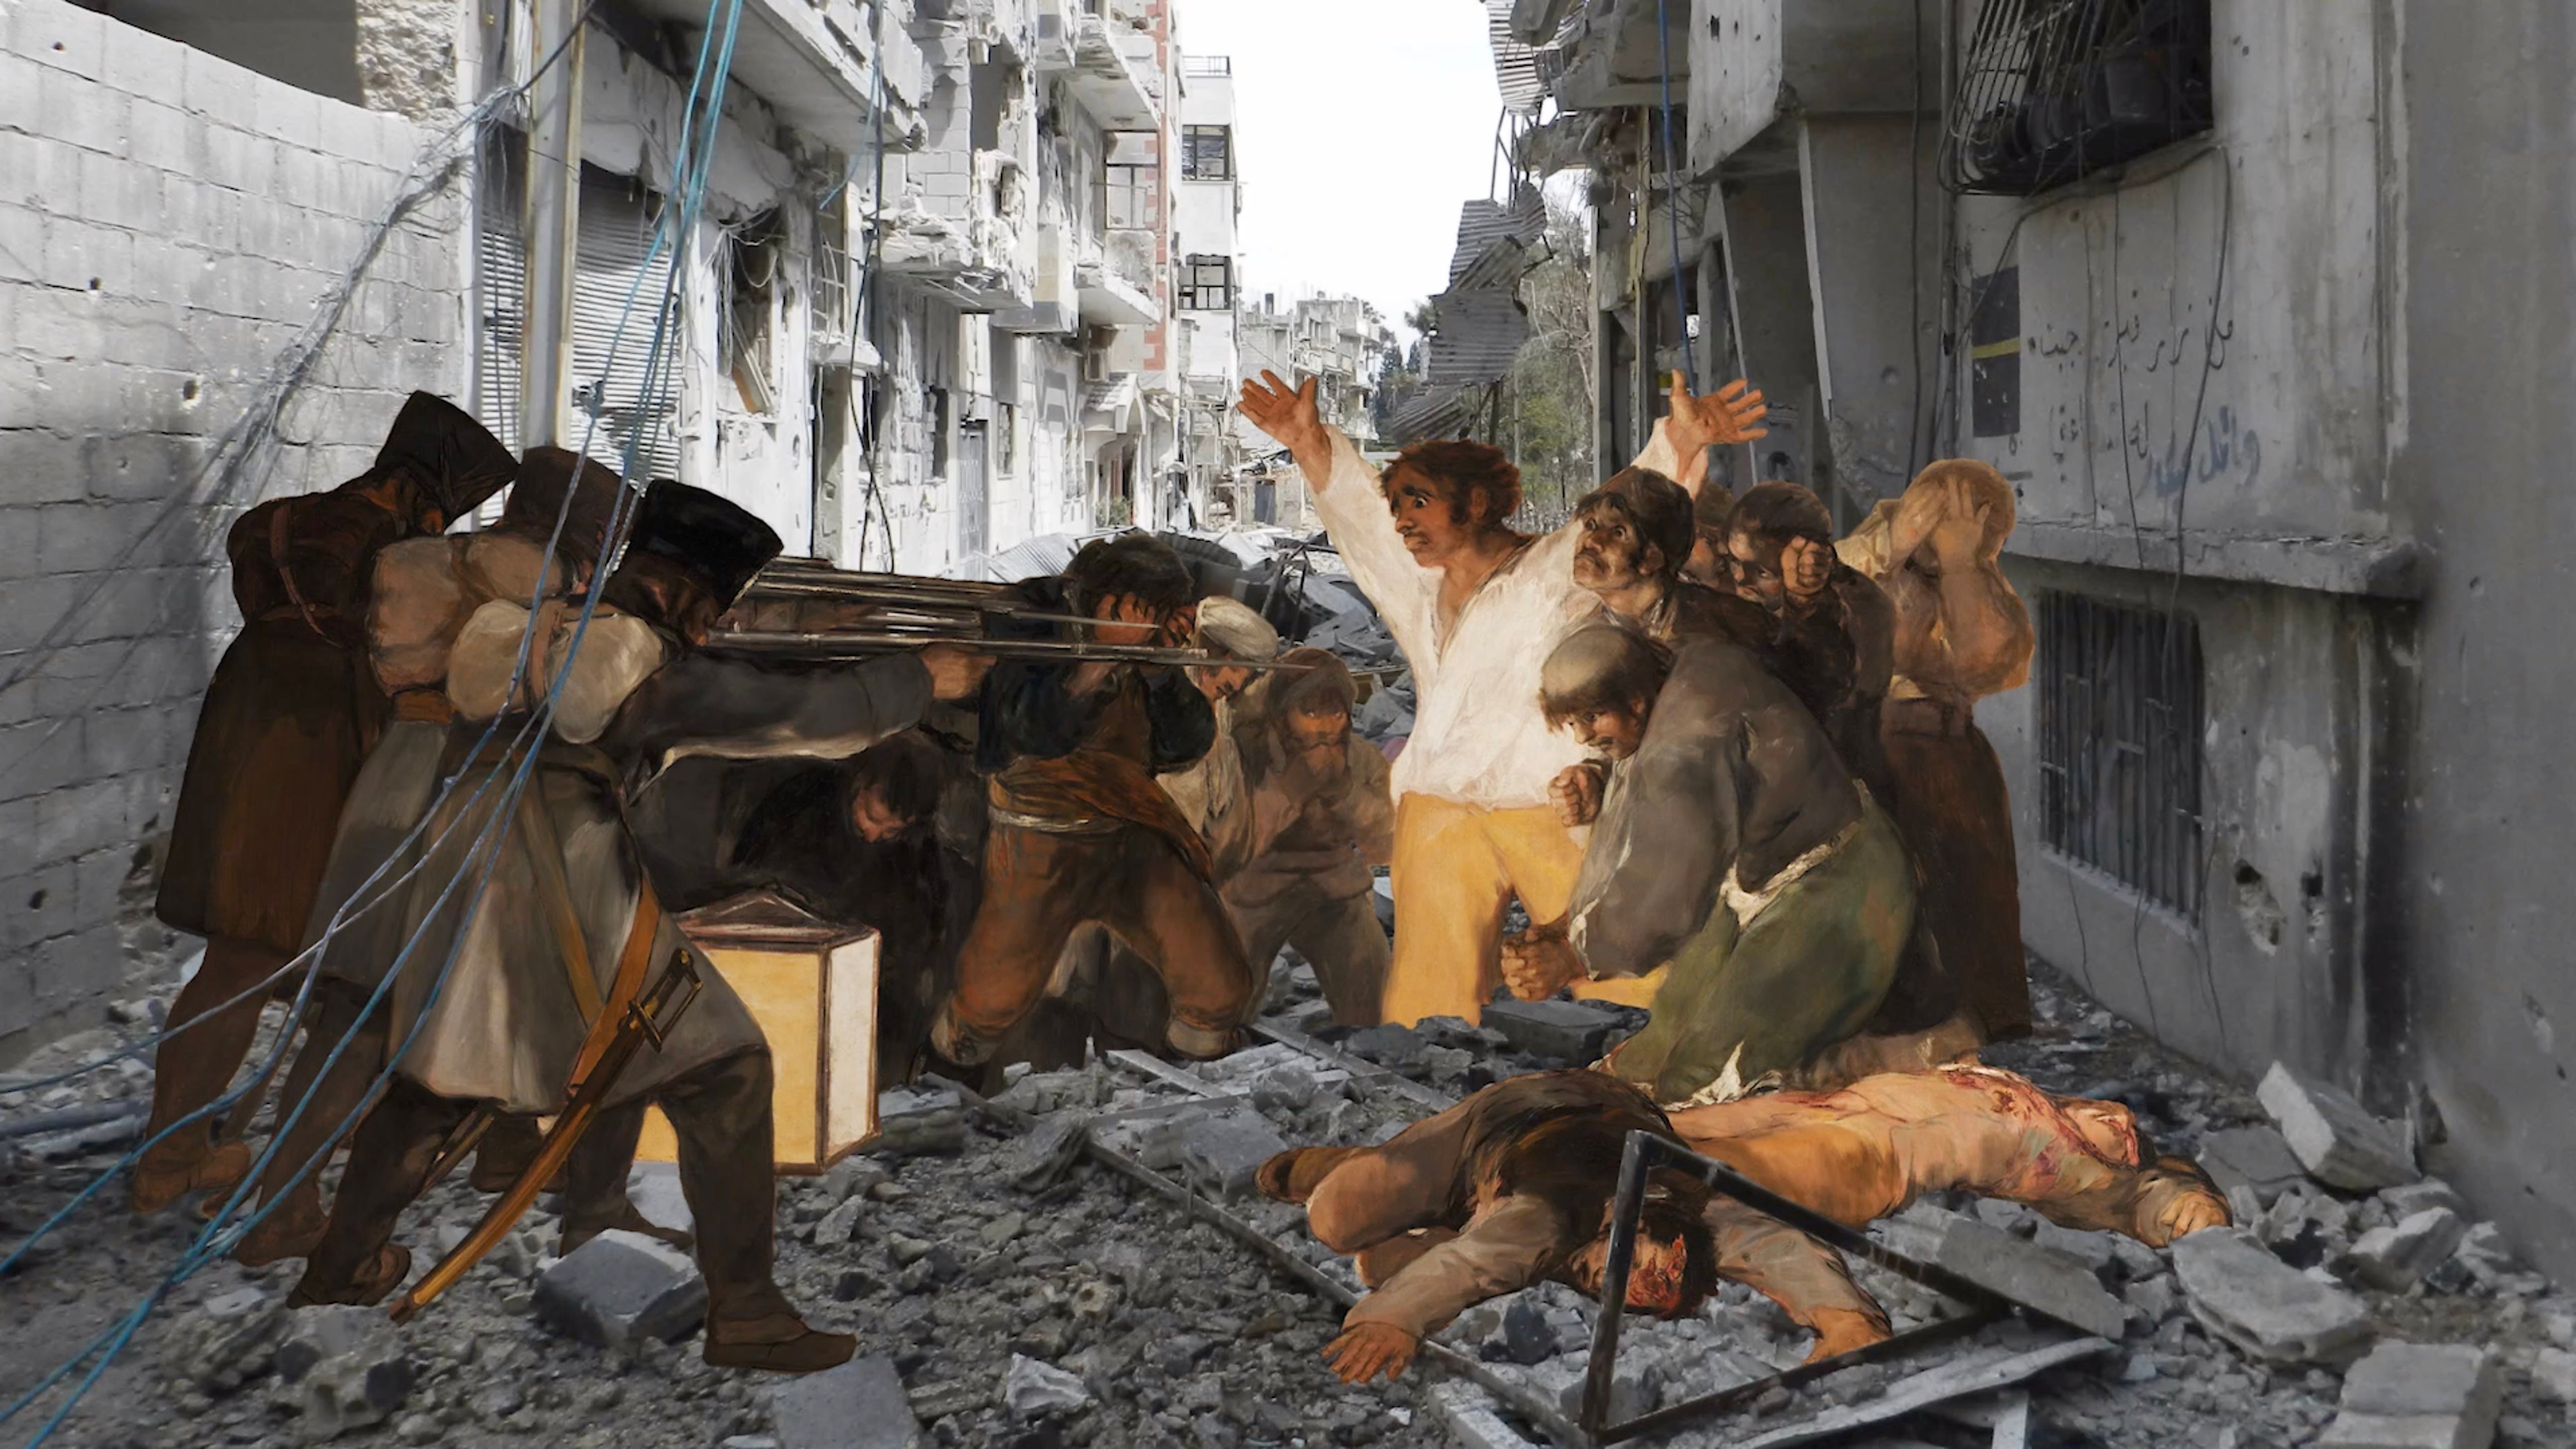 A photomontage of Goya’s ‘Third of May’ by Tammam Azzam